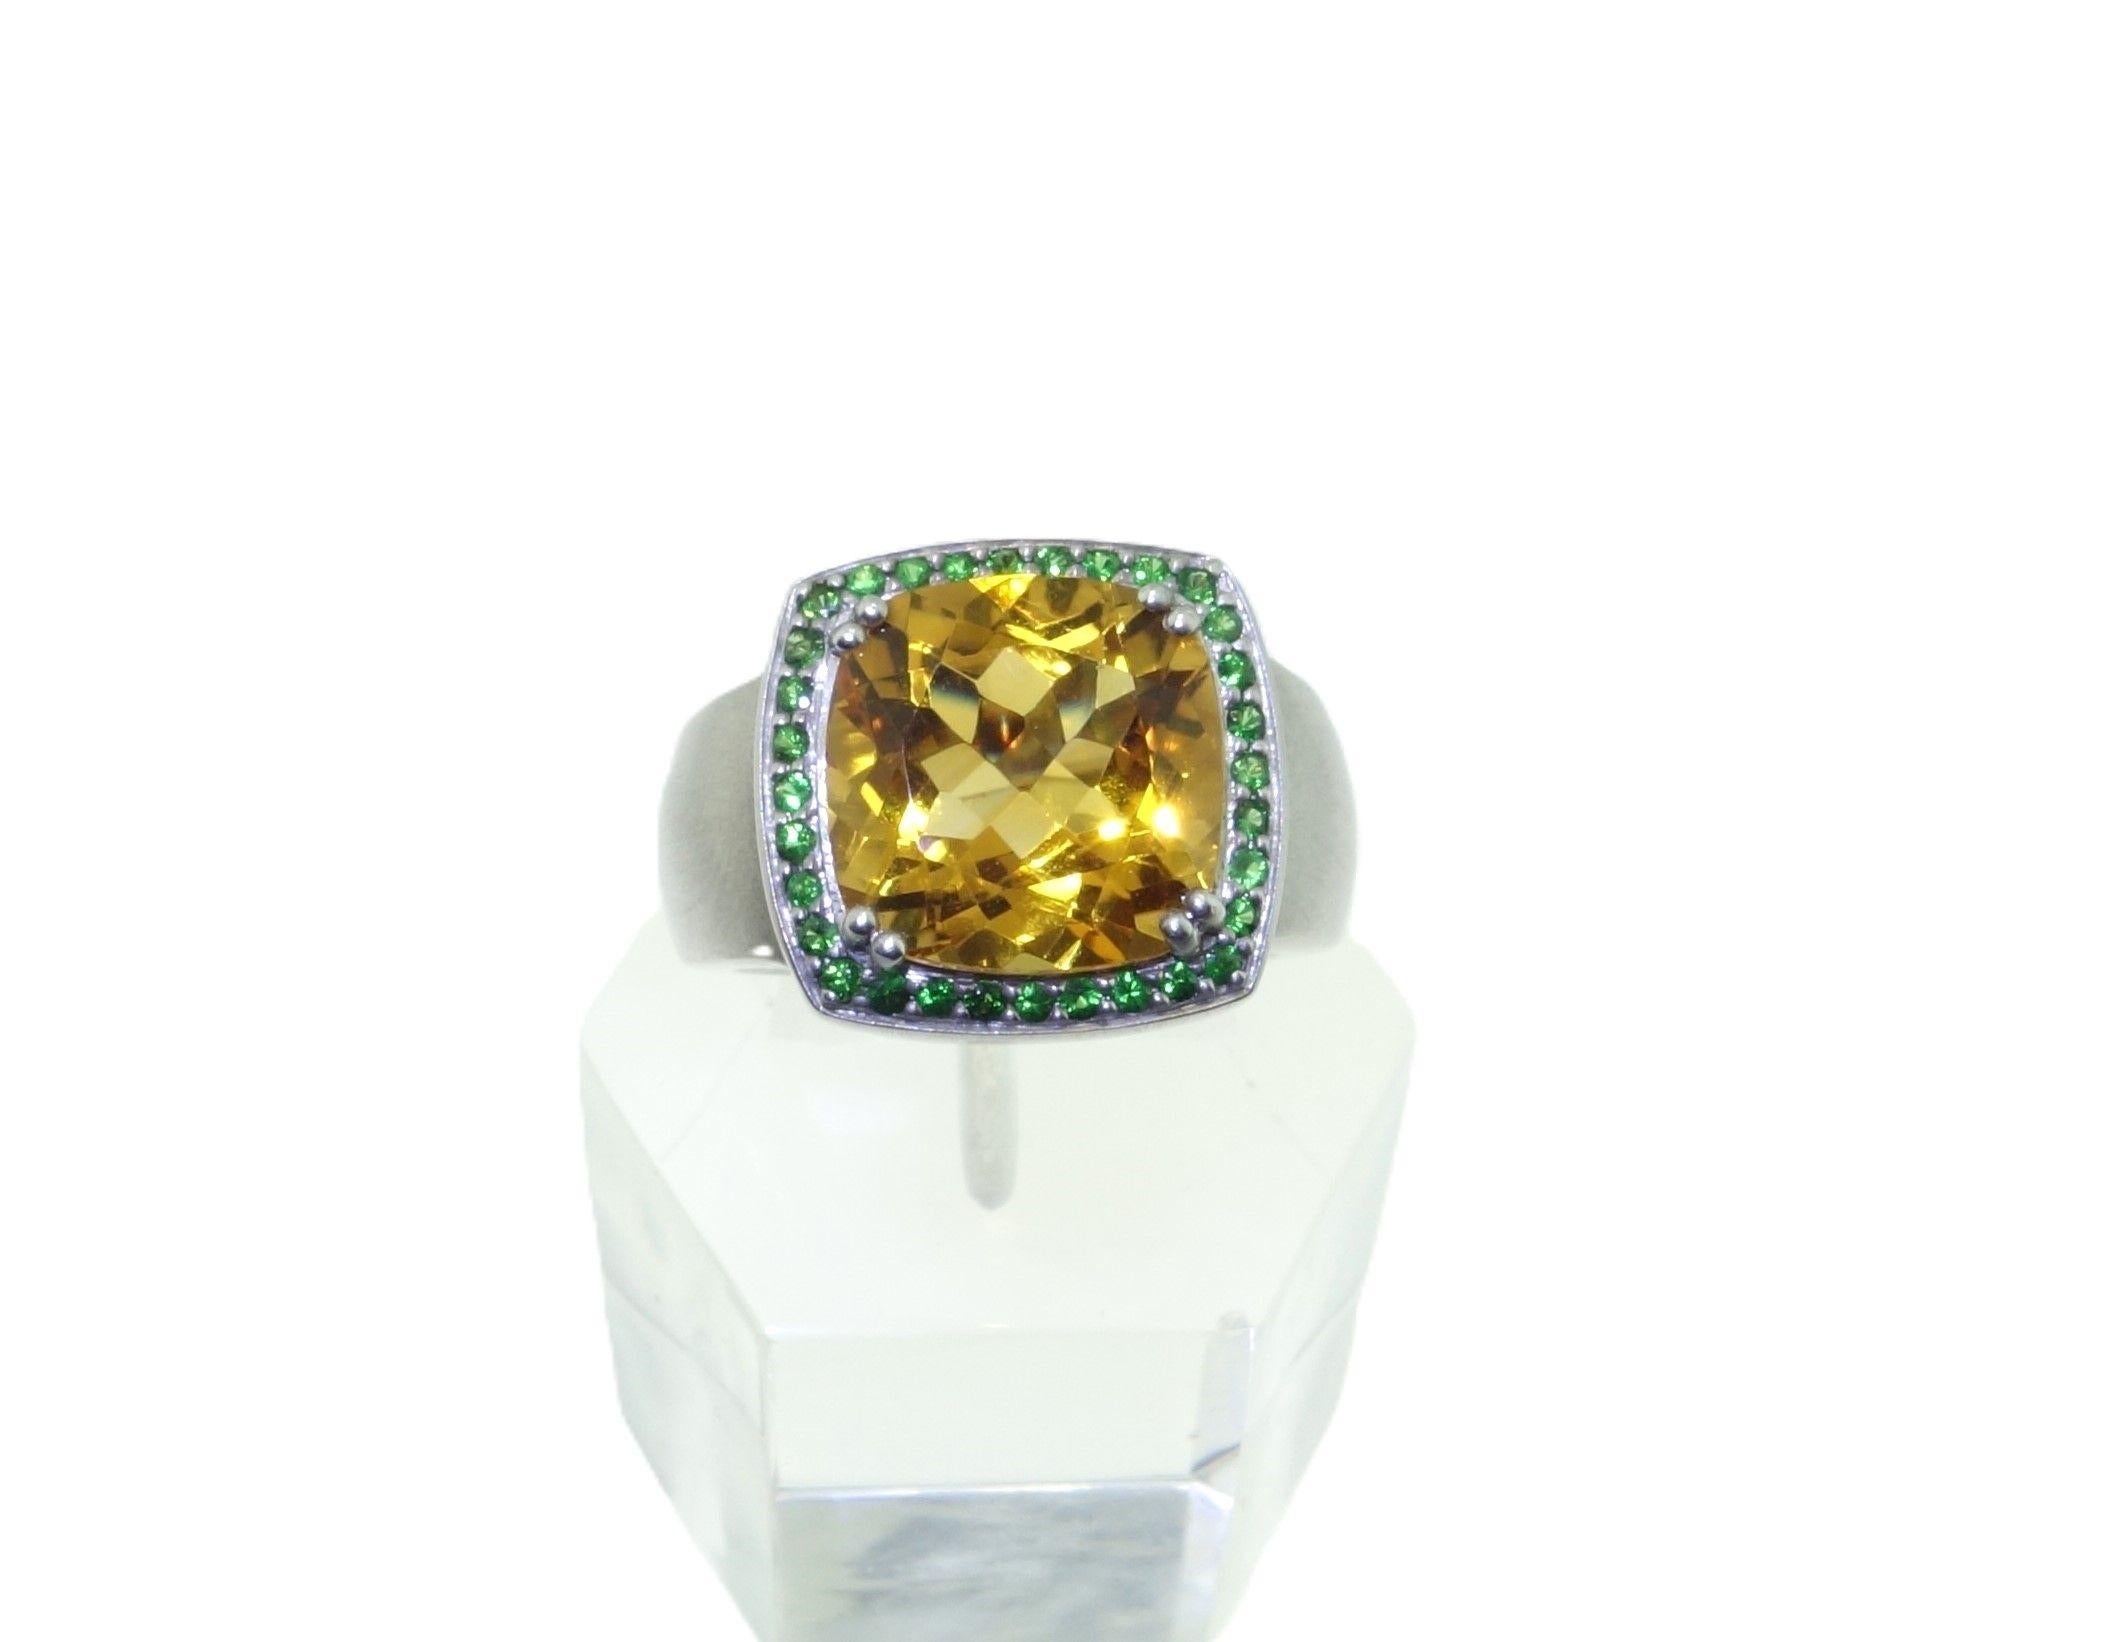 Simply Beautiful! Finely detailed 12mm Cushion Citrine and Tsavorite Sterling Silver Vintage Cocktail Ring. Centering a securely nestled Hand set 6.57 Carat Cushion Citrine, surrounded by 30 Round Tsavorite, weighing approx. 0.32tcw. Hand crafted